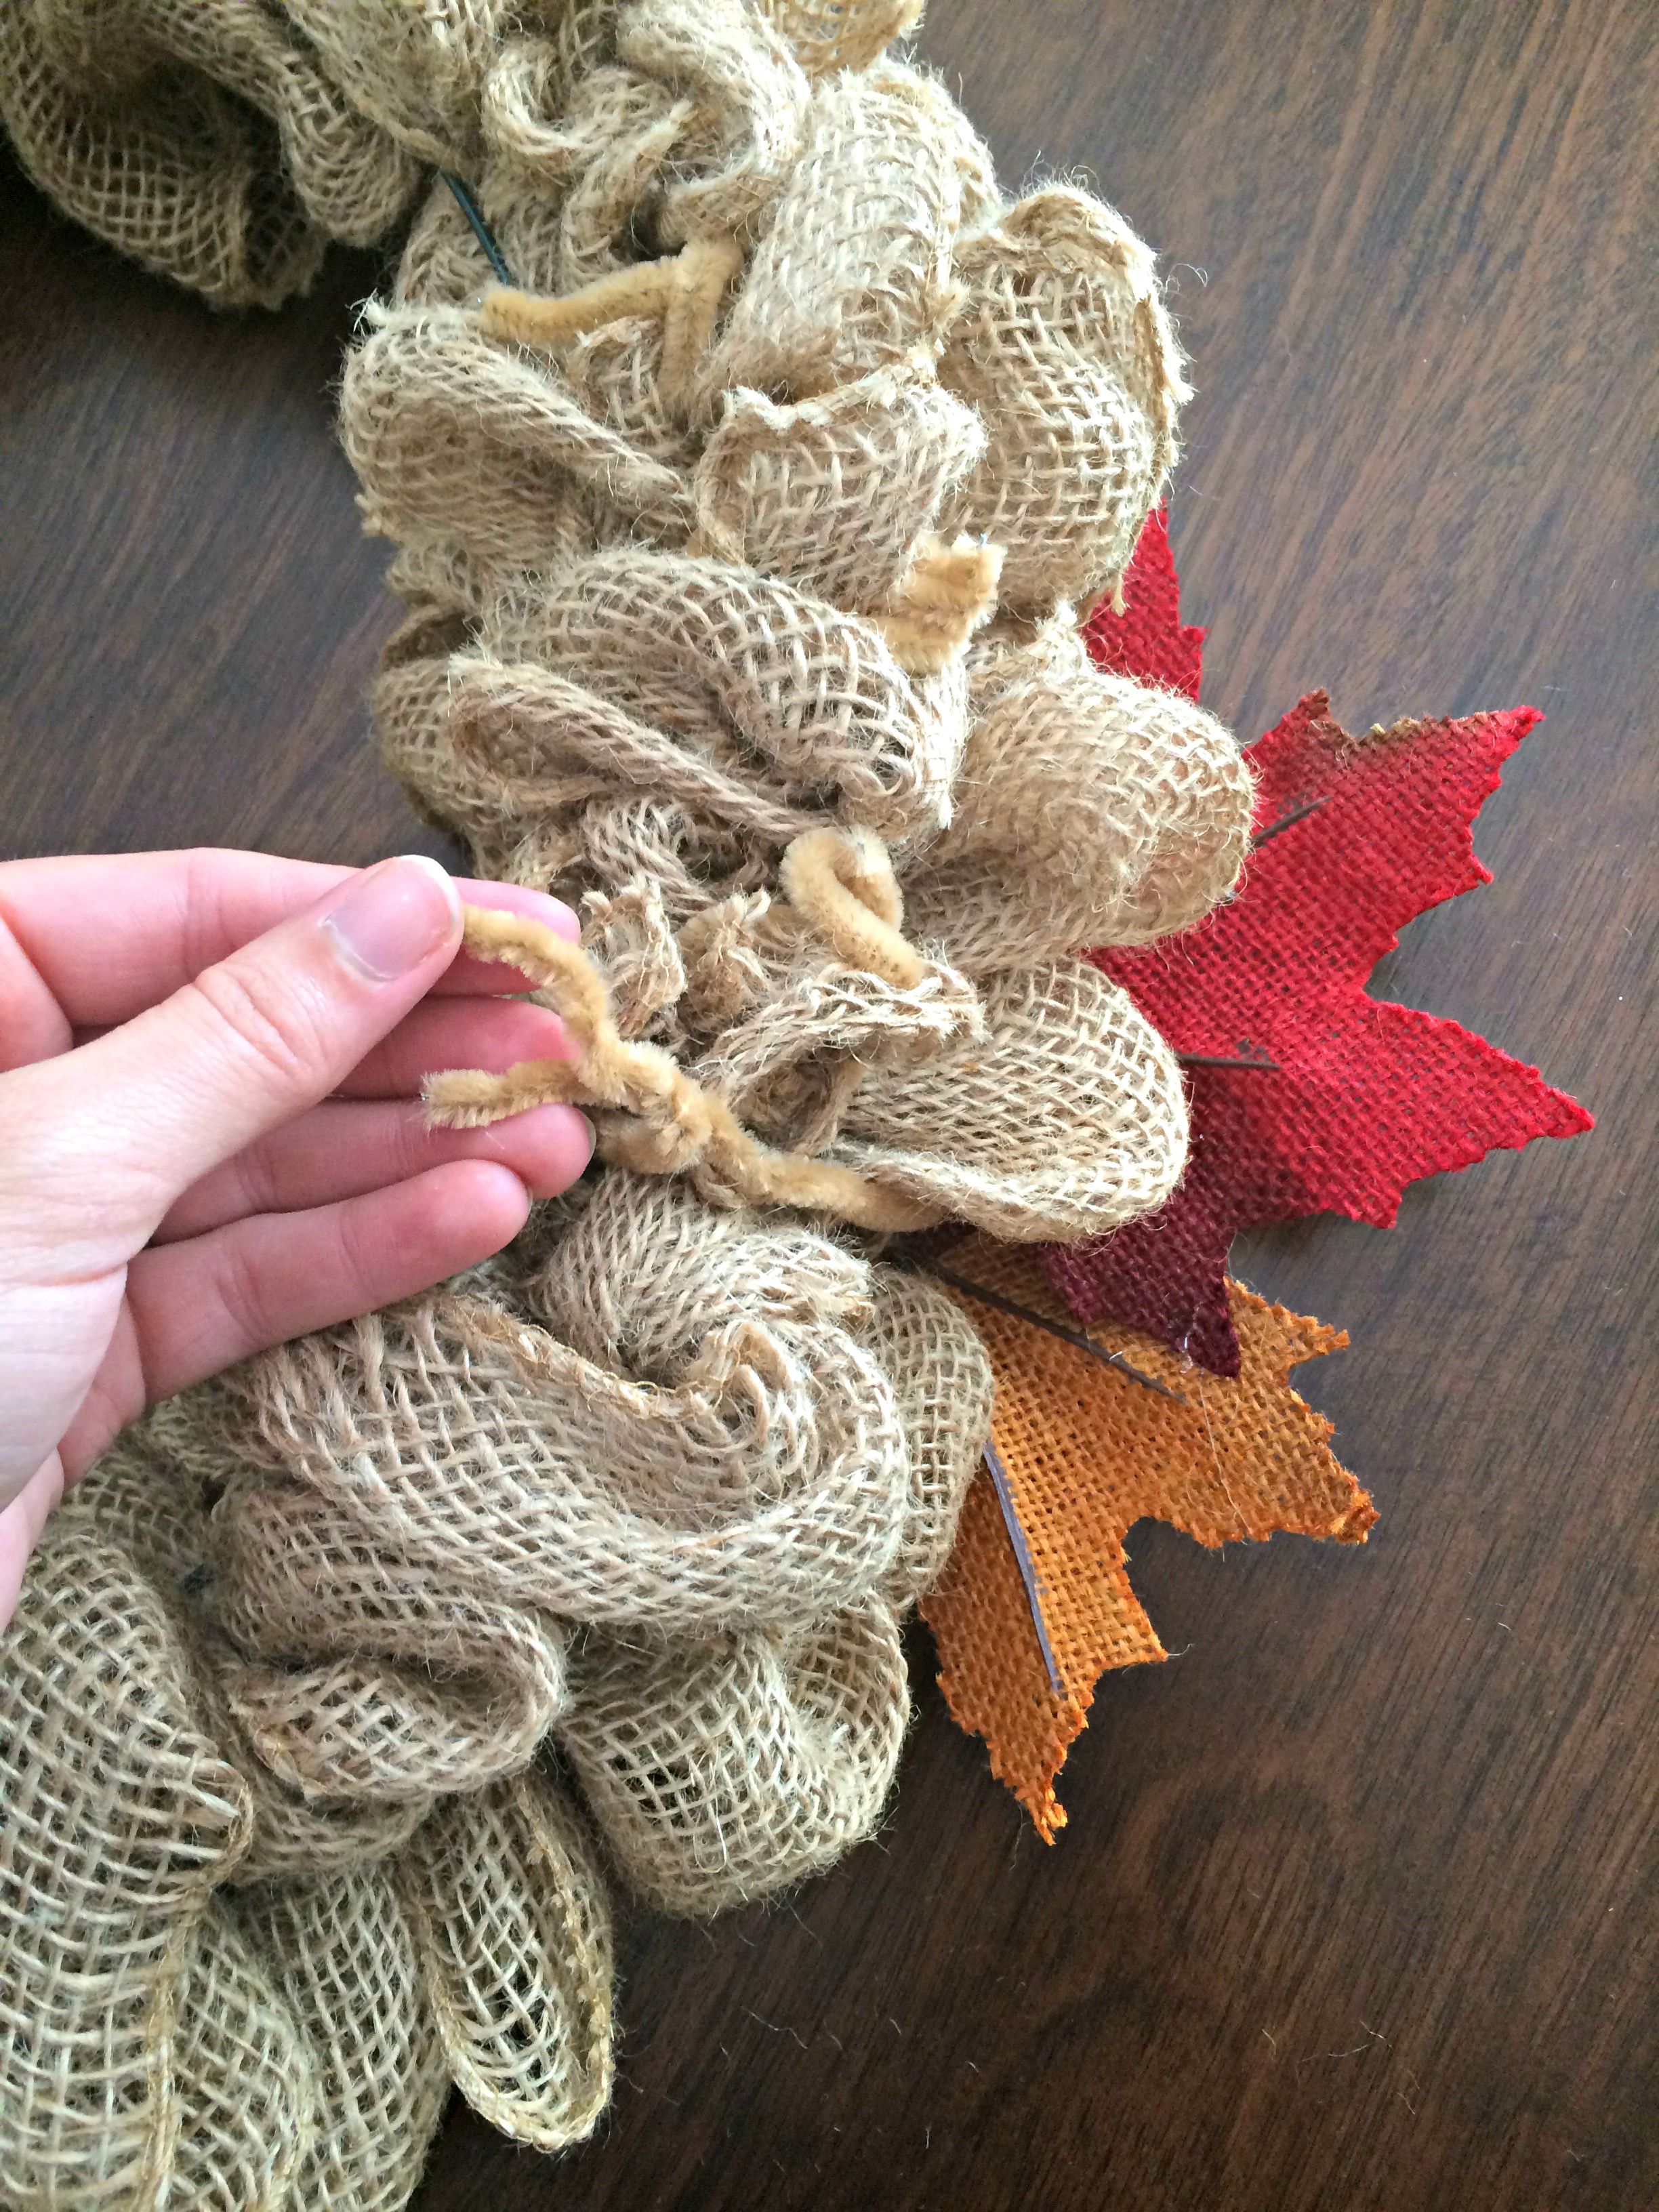 This rustic fall burlap bubble wreath is simple, beautiful, easy to make, and involves just a few materials. Check out this post for the easy step-by-step tutorial! 